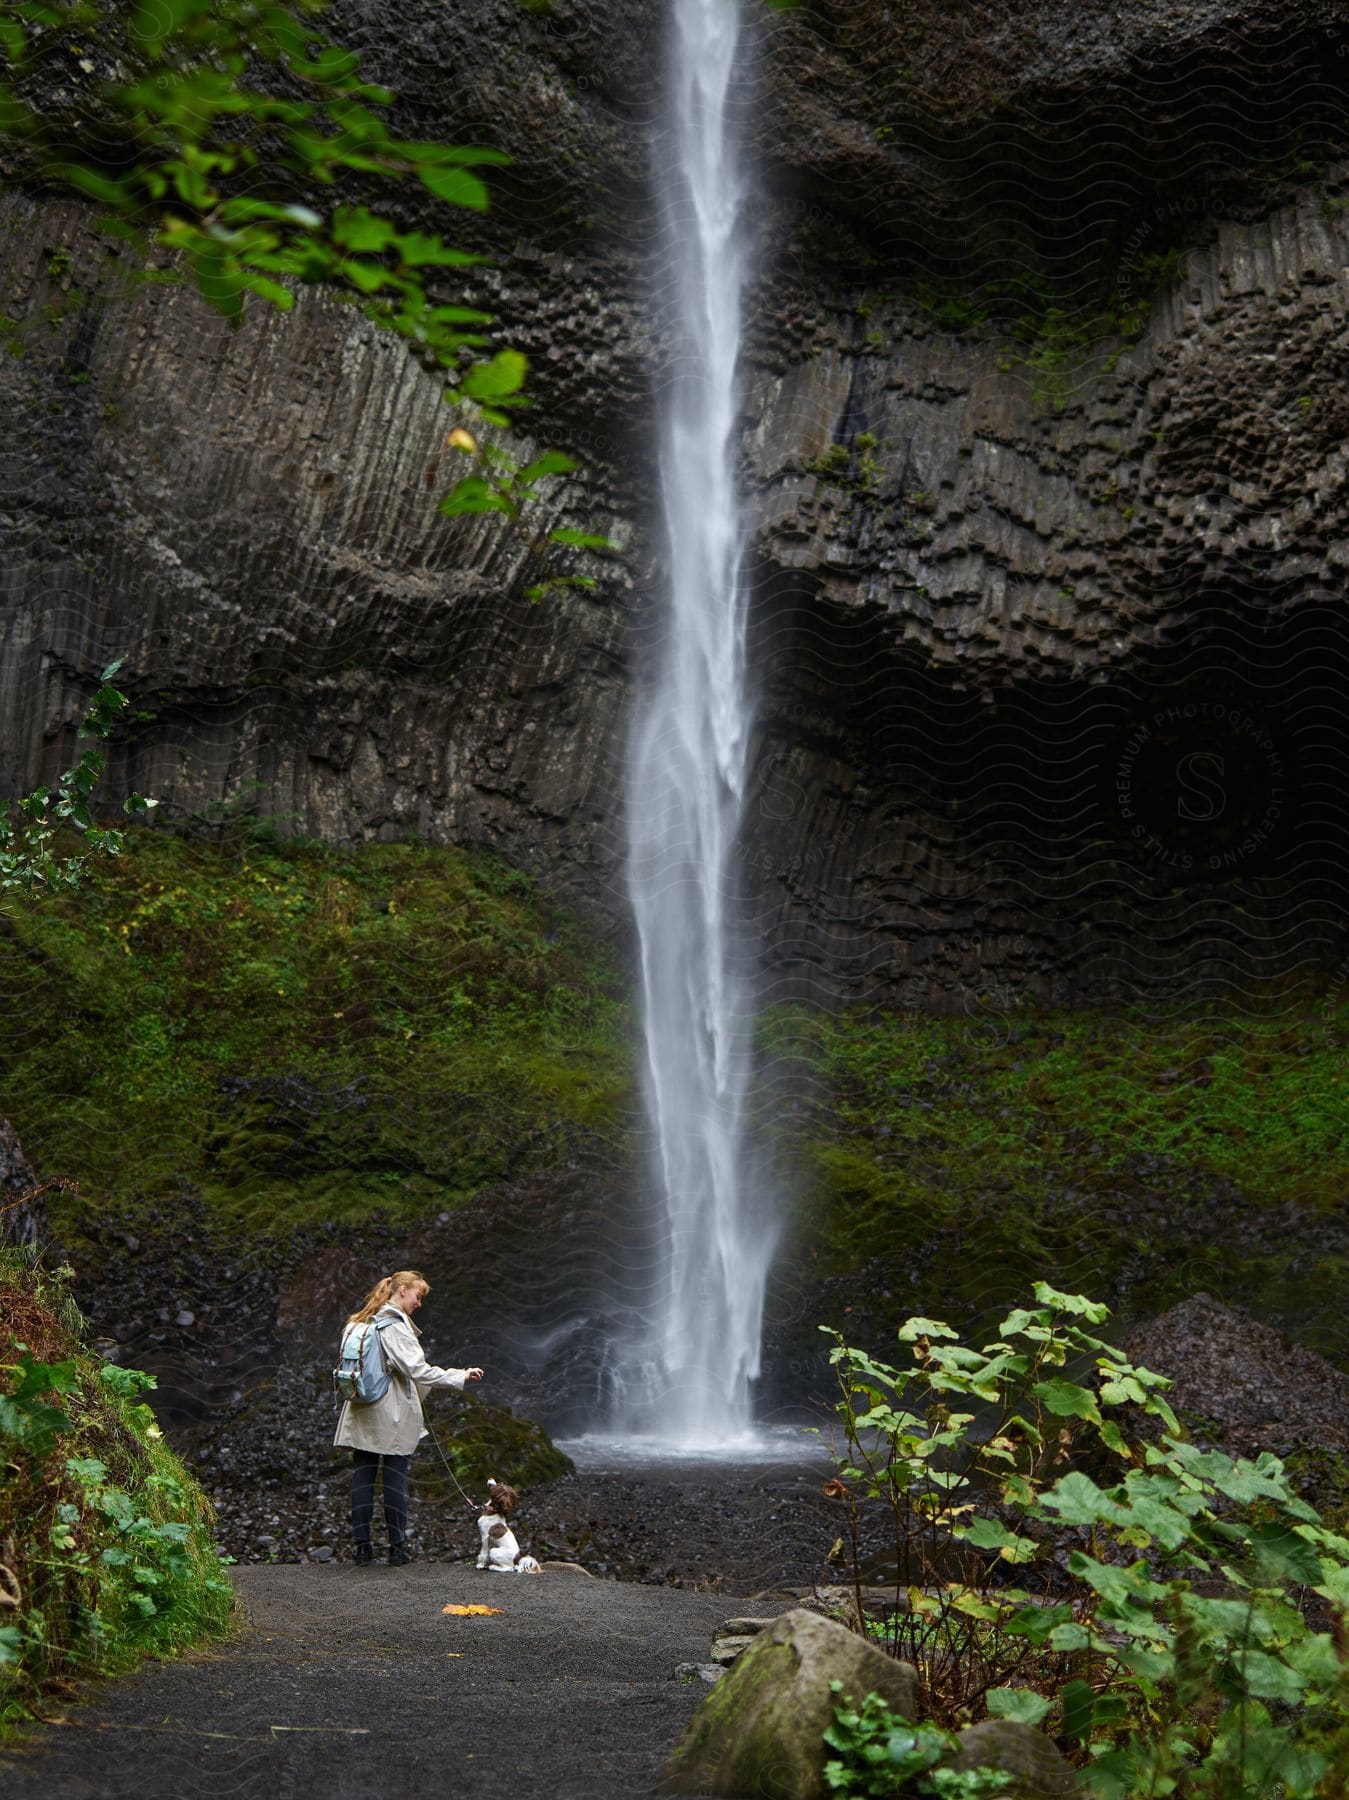 A woman standing in front of a tall waterfall with her dog on a leash during the day